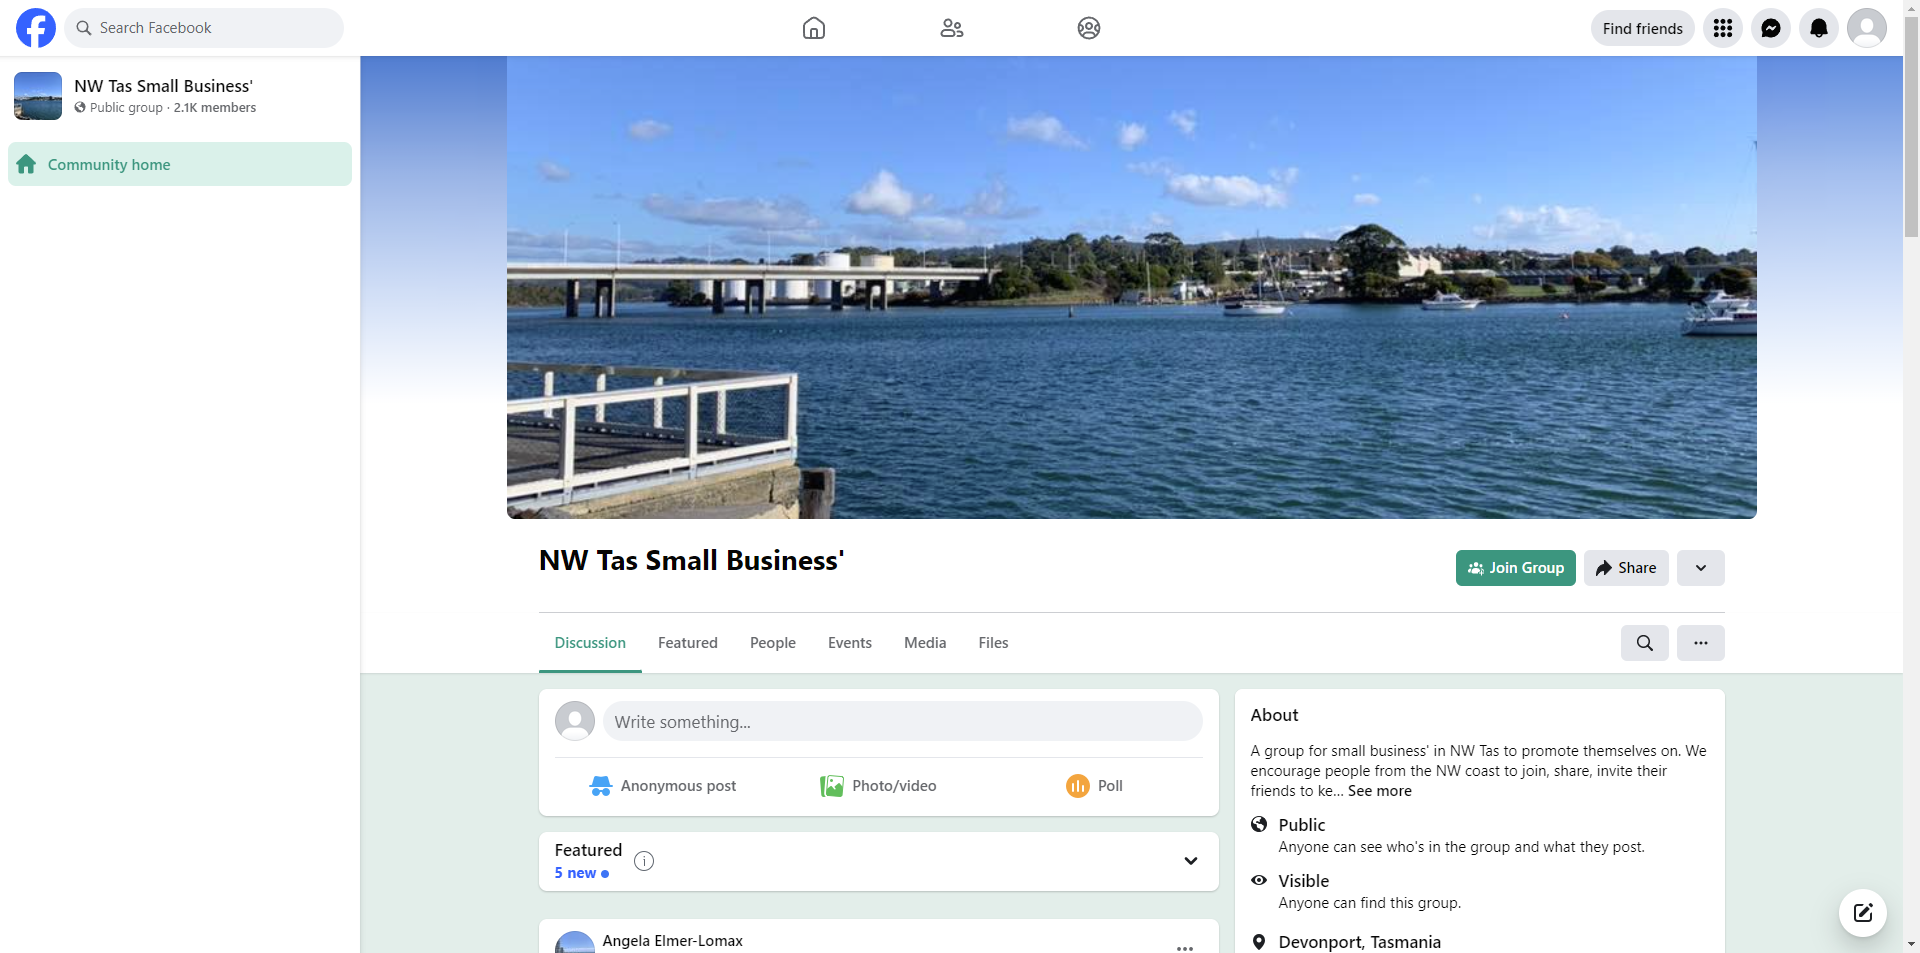 NW Tas Small Business